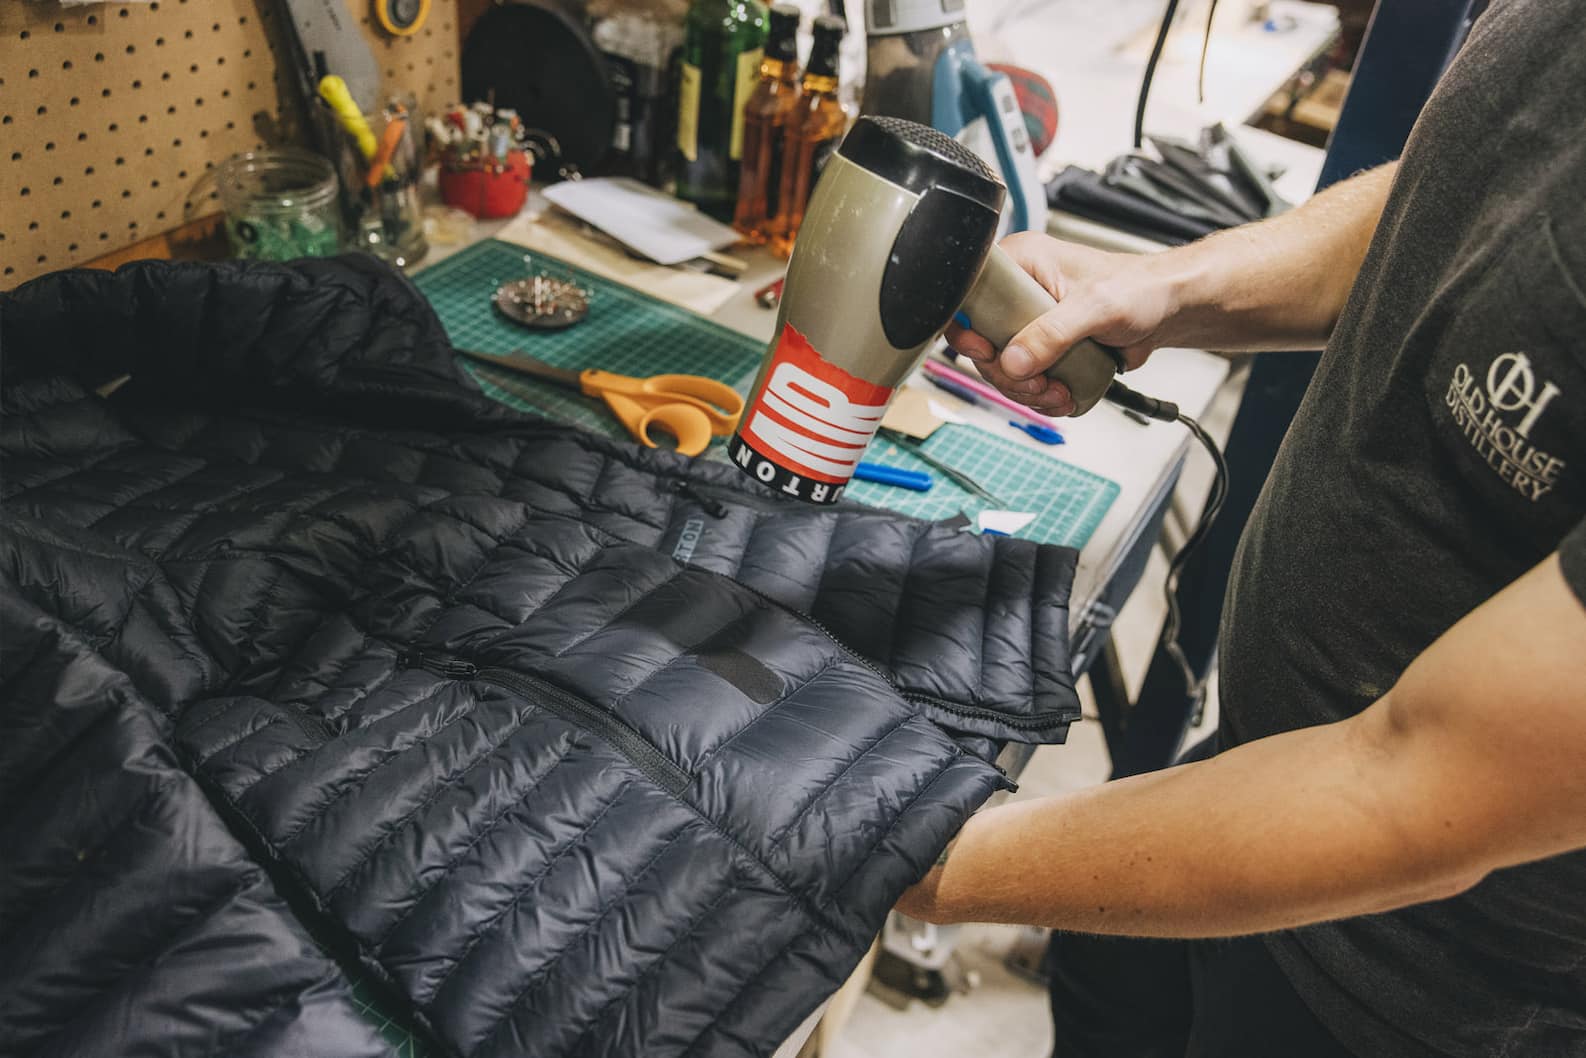 How to patch a down jacket the easy way